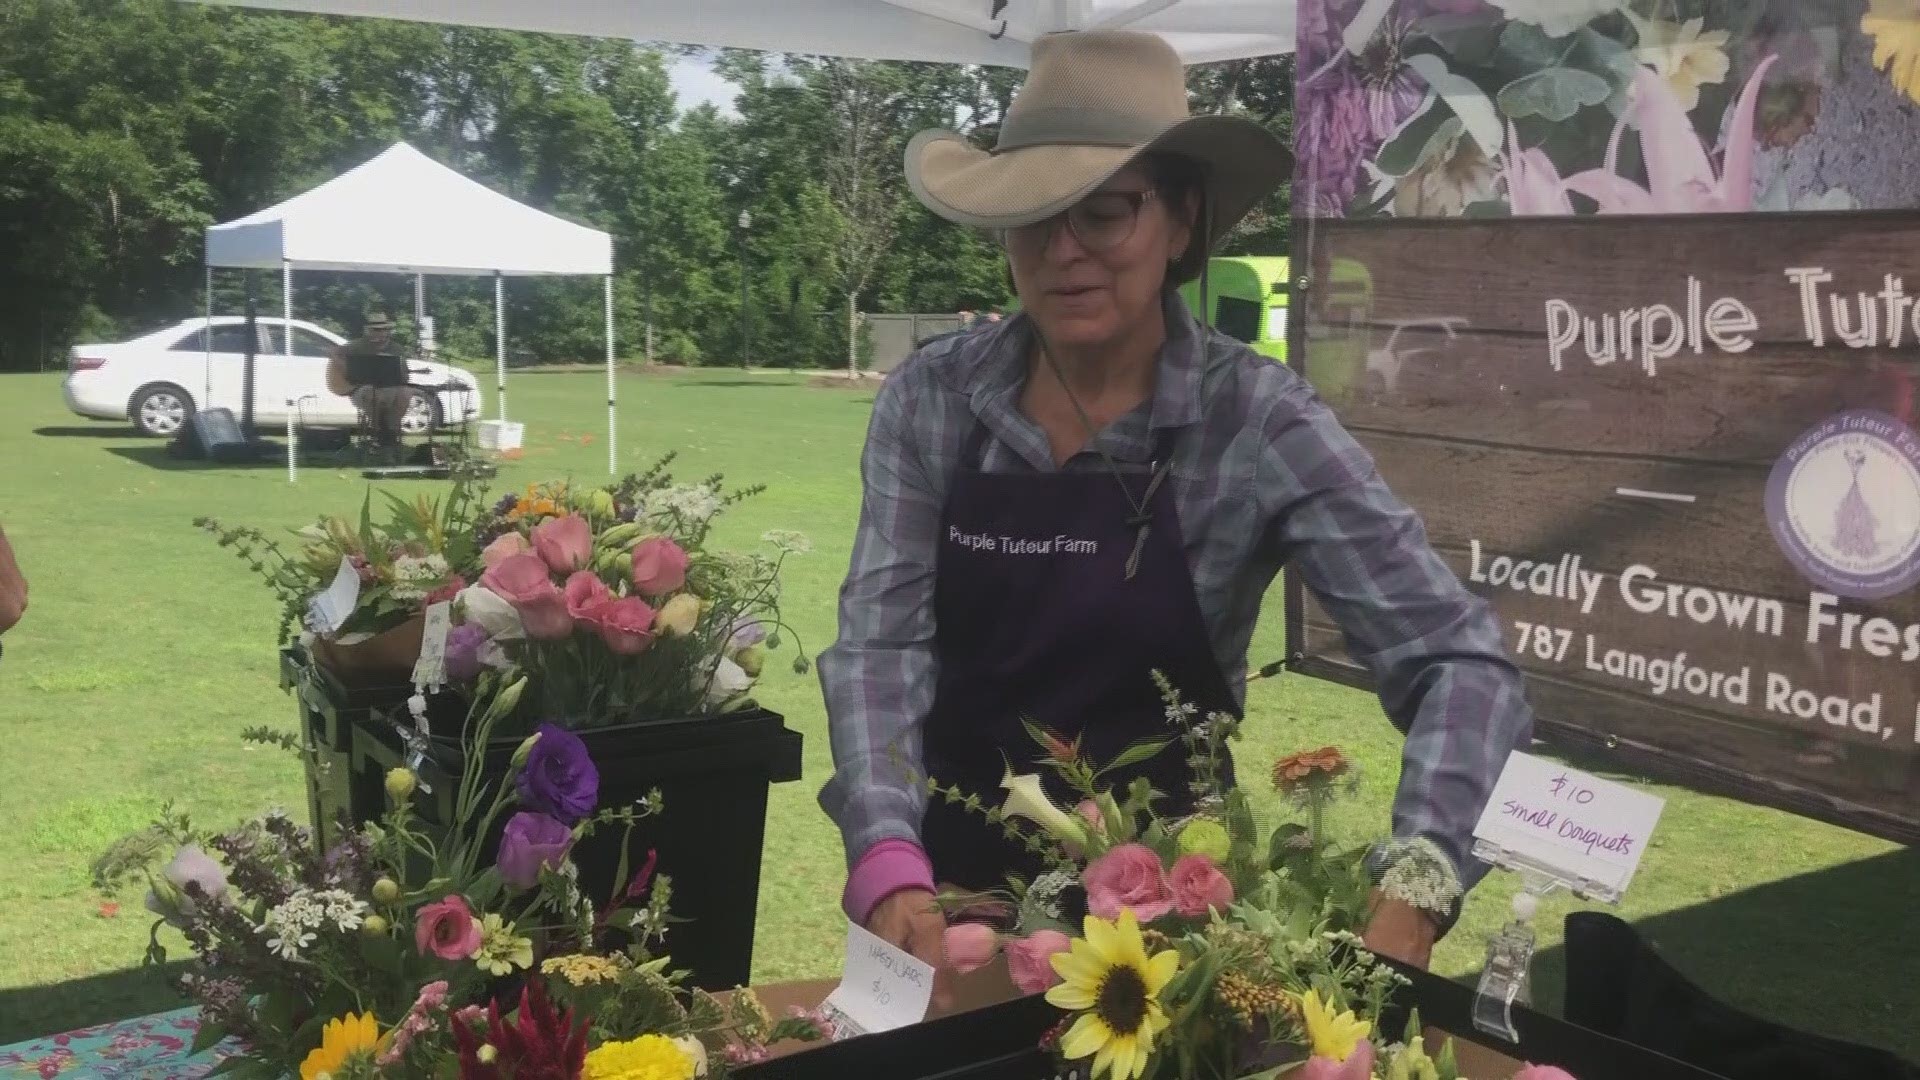 Purple Tuteur Farm cut flower farm in Blythewood, SC, is one of the stops on the Ag+Art Tour 2019 featuring farms and artisans in Richland County